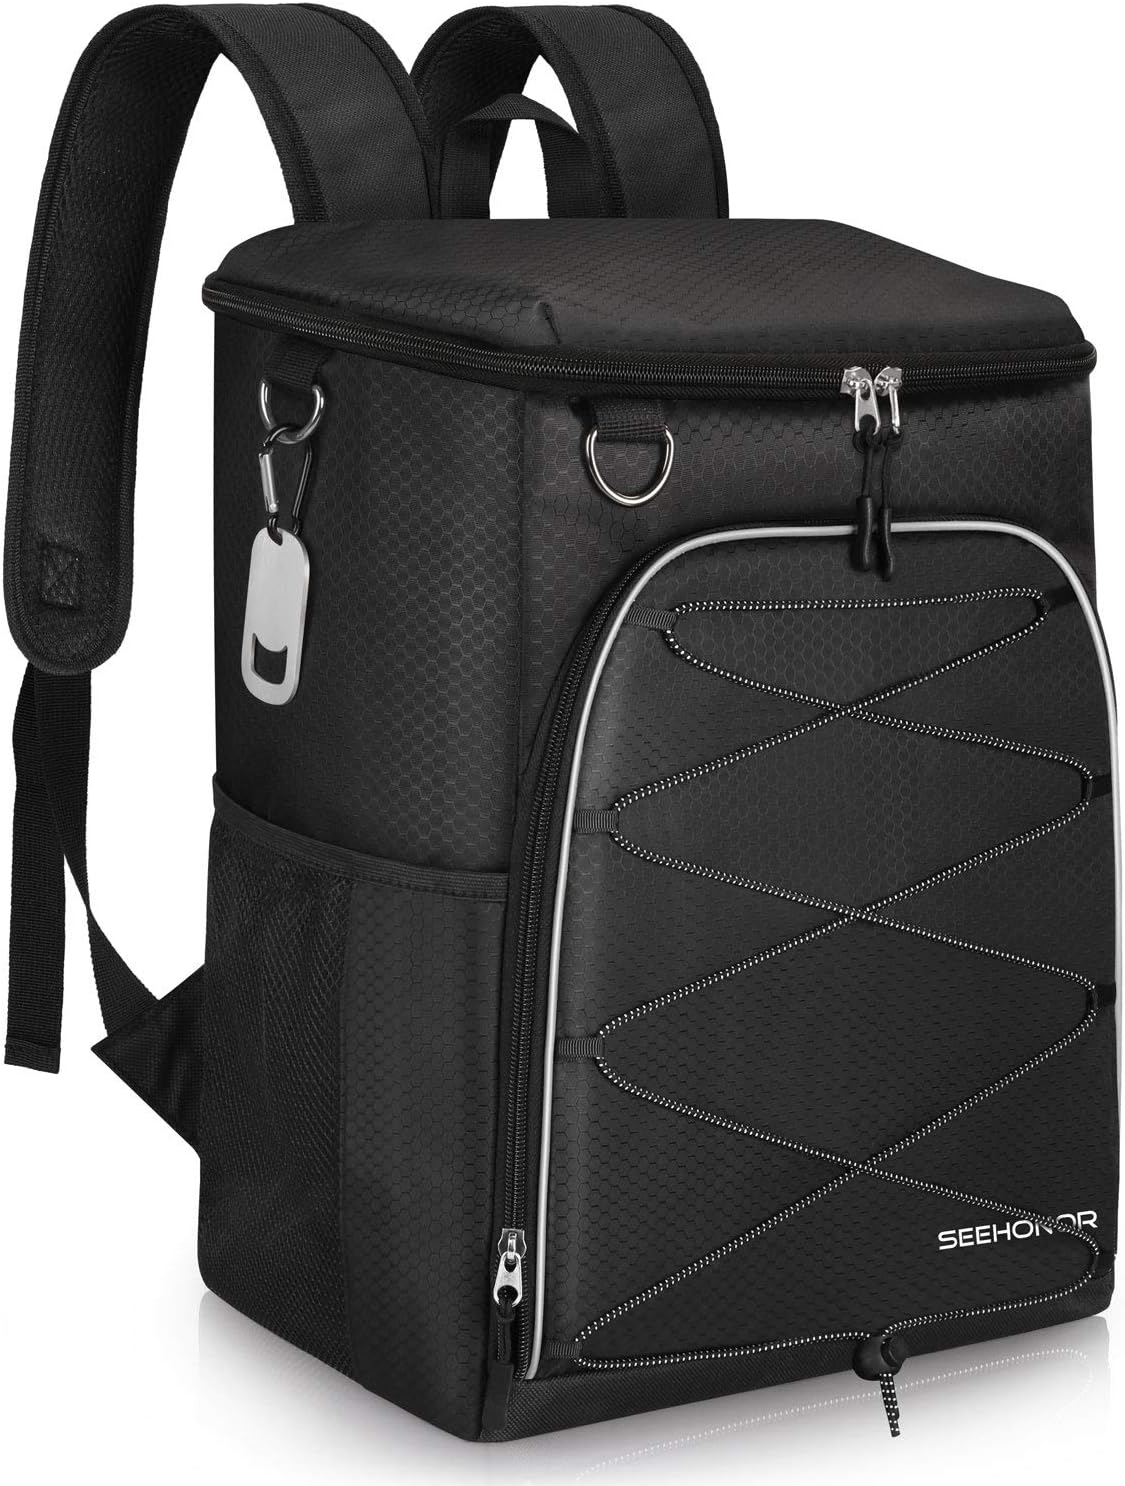 3 Top-Rated Best Backpack Coolers For Fishing Trips